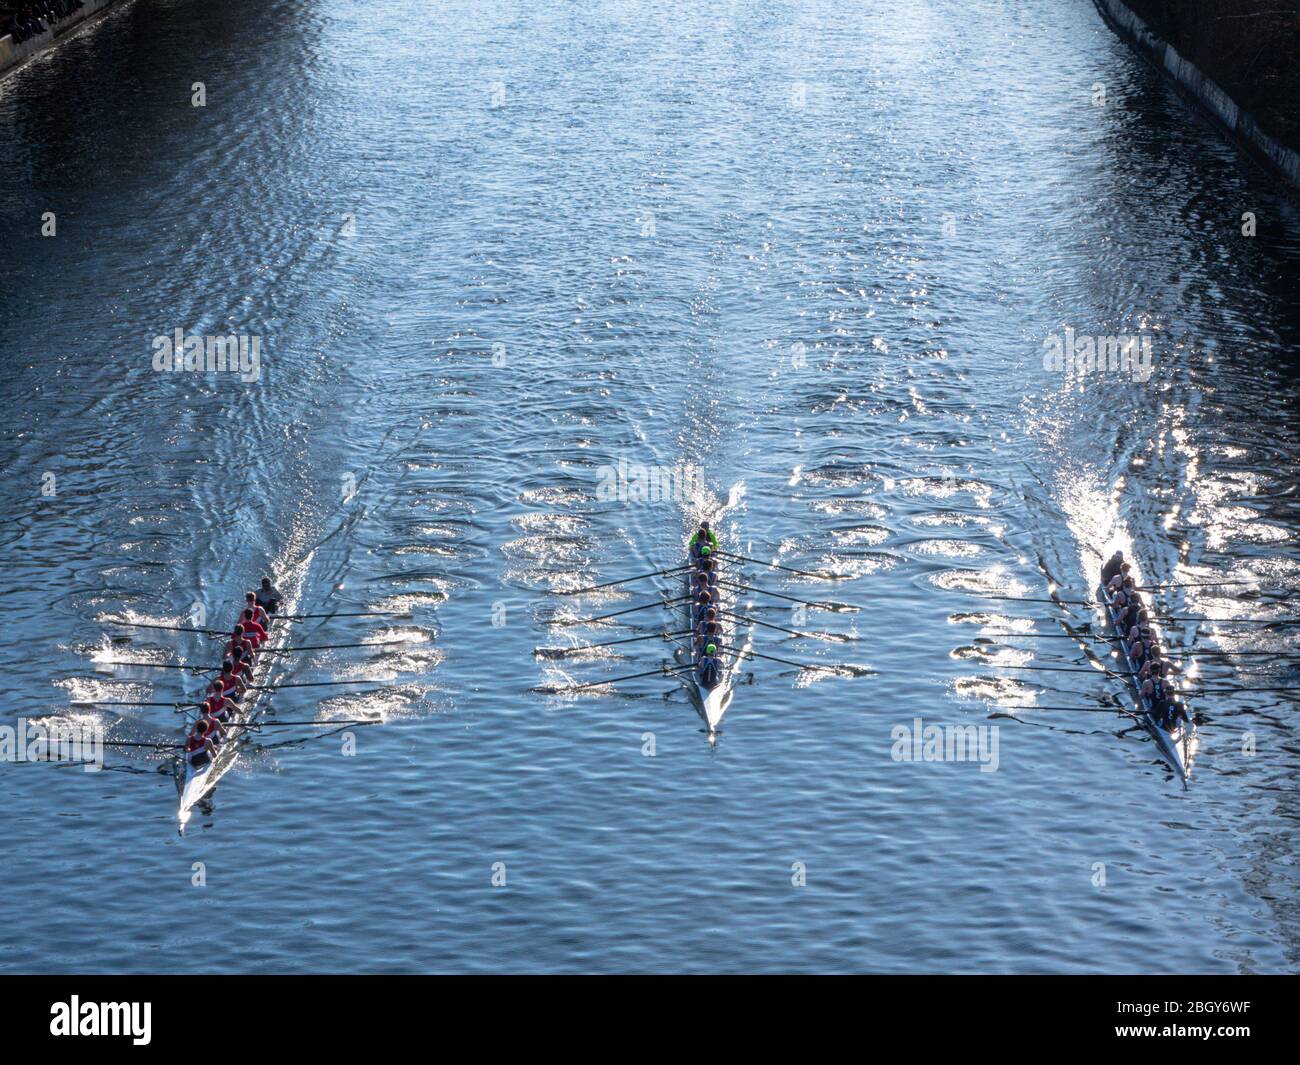 Rowing competition at Montlake Cut in Seattle Washington Stock Photo